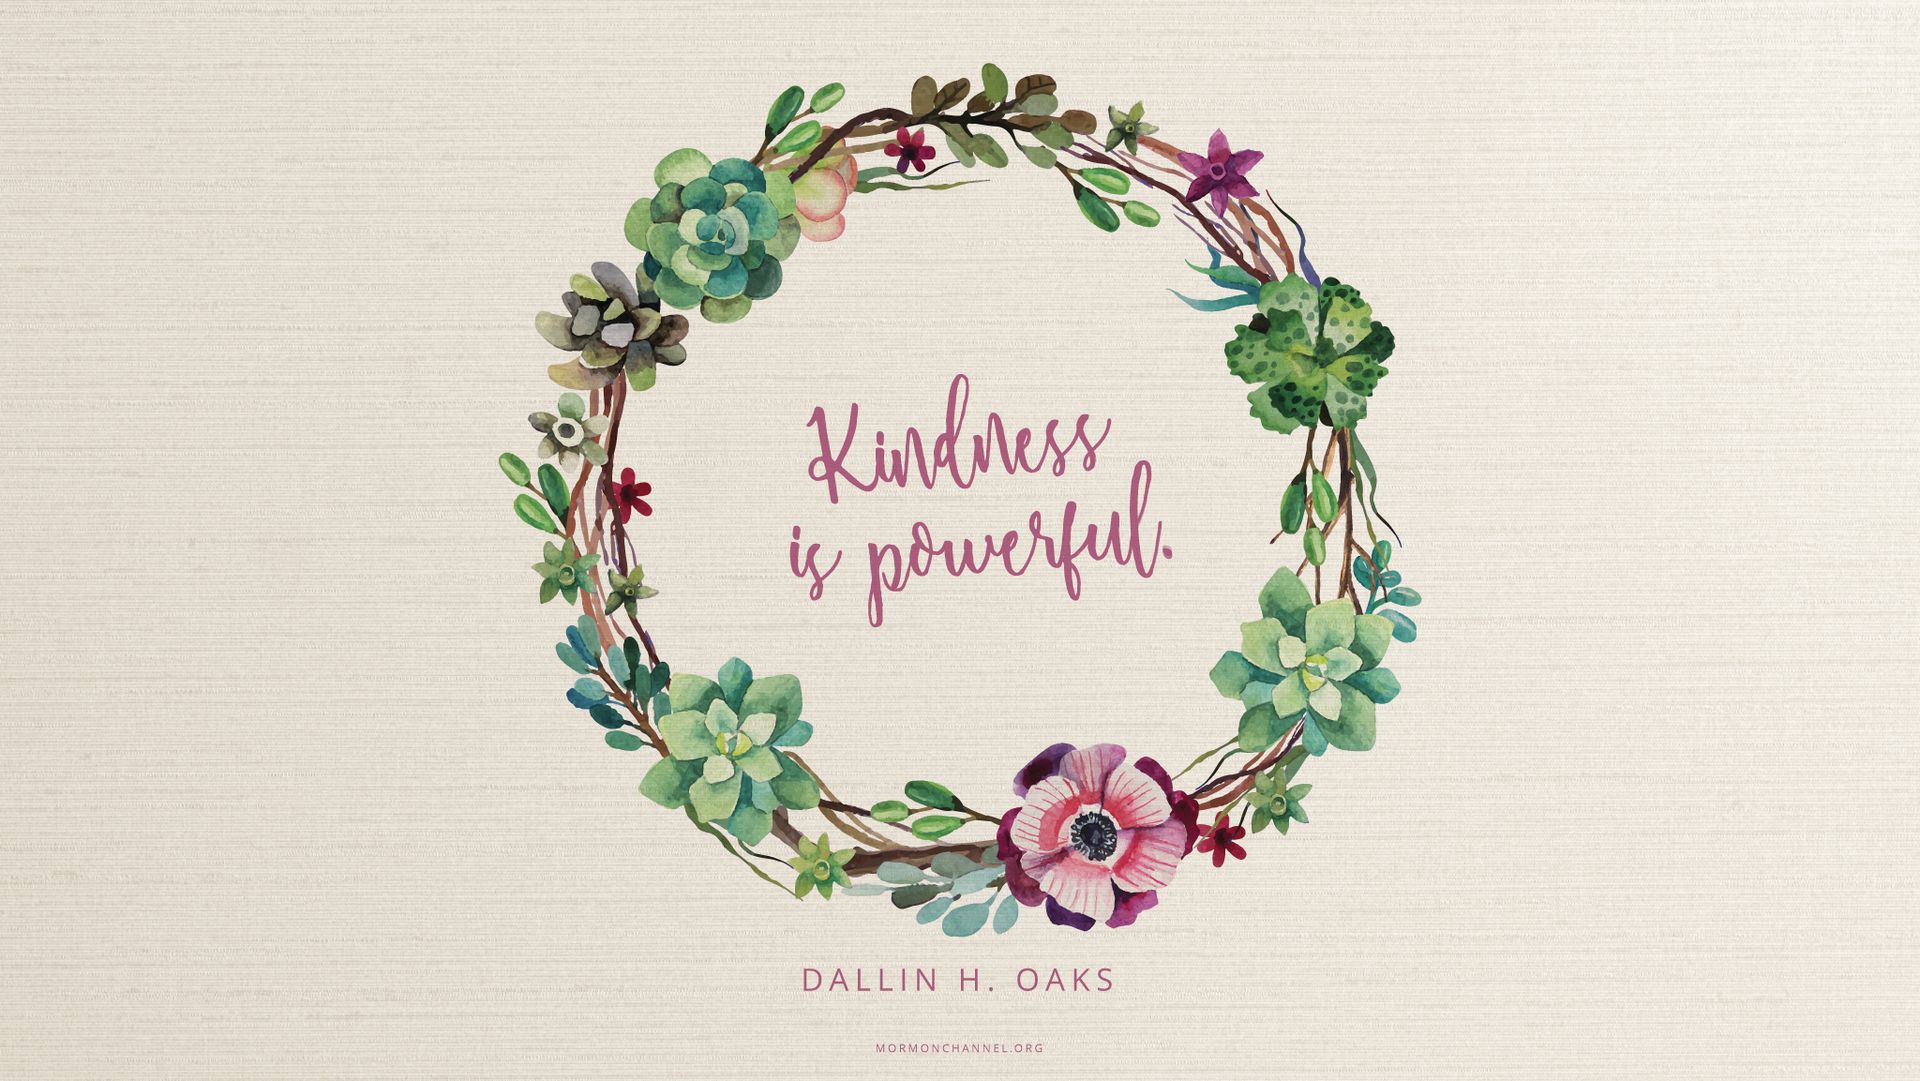 “Kindness is powerful.”—Elder Dallin H. Oaks, “Loving Others and Living with Differences”